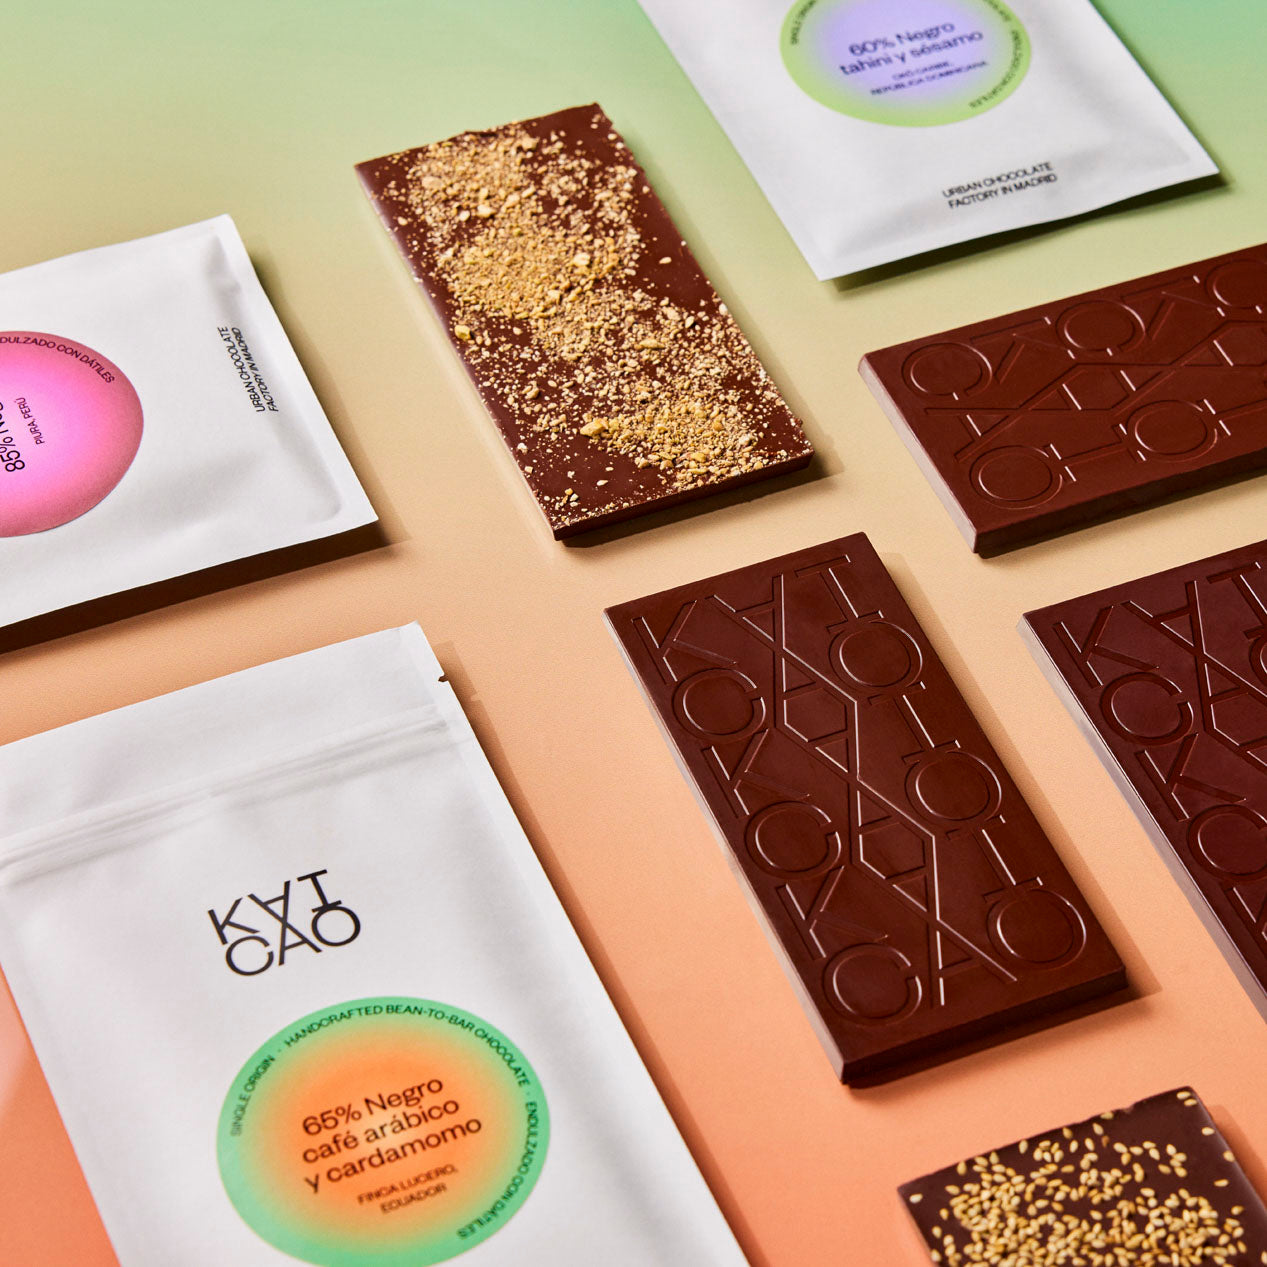 Bean to bar chocolate collection